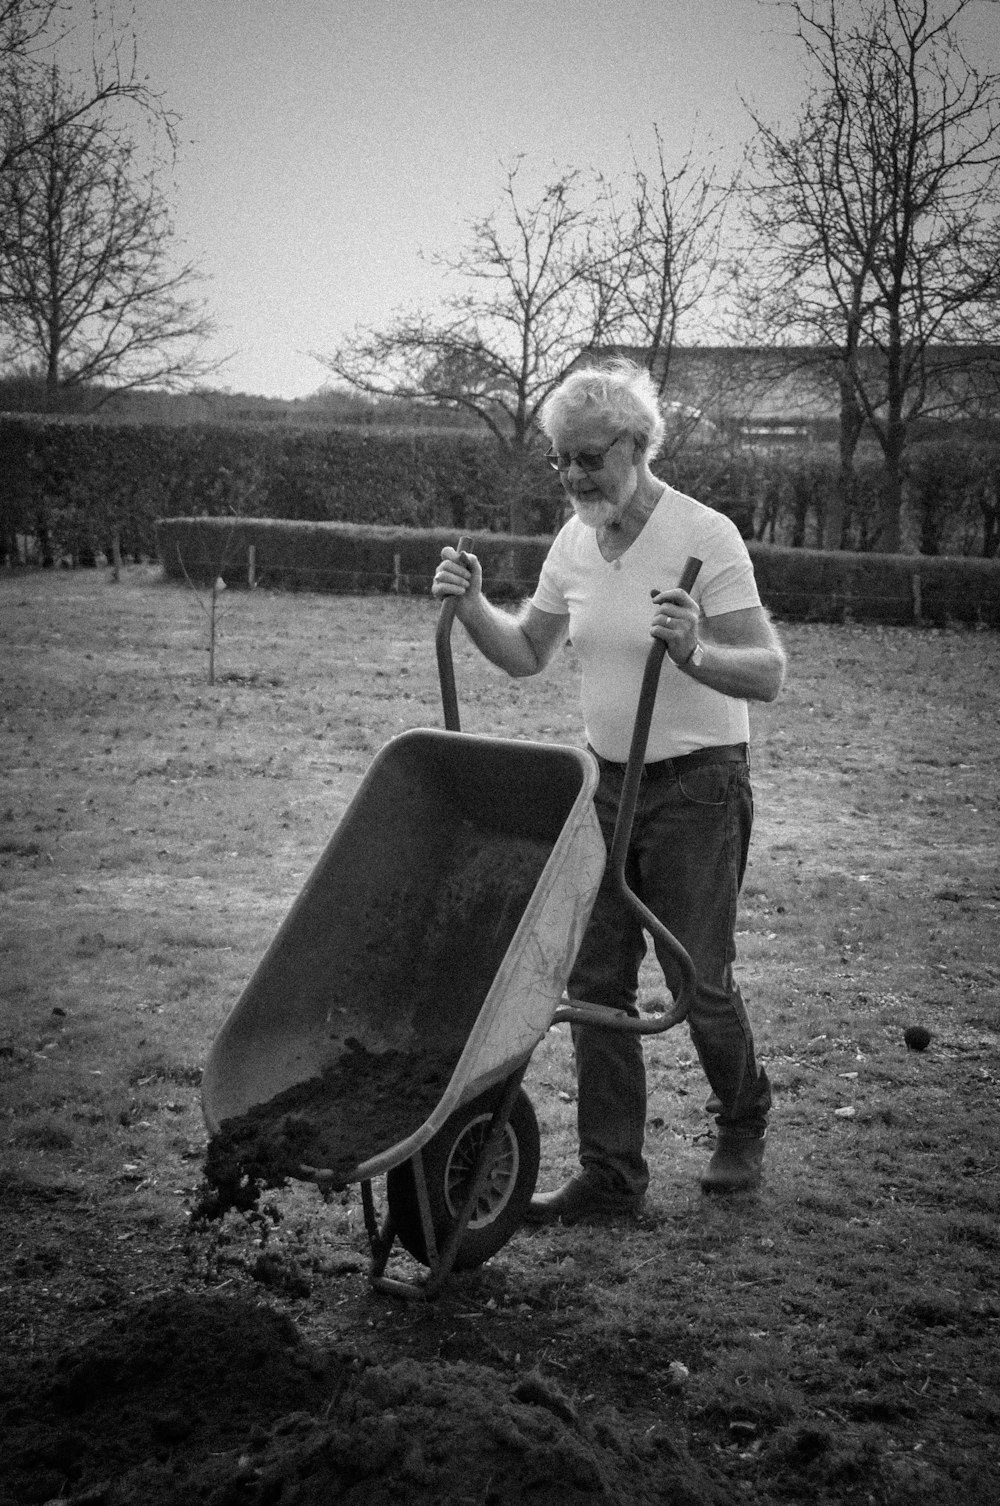 grayscale photo of man in long sleeve shirt and pants holding a wheel barrow